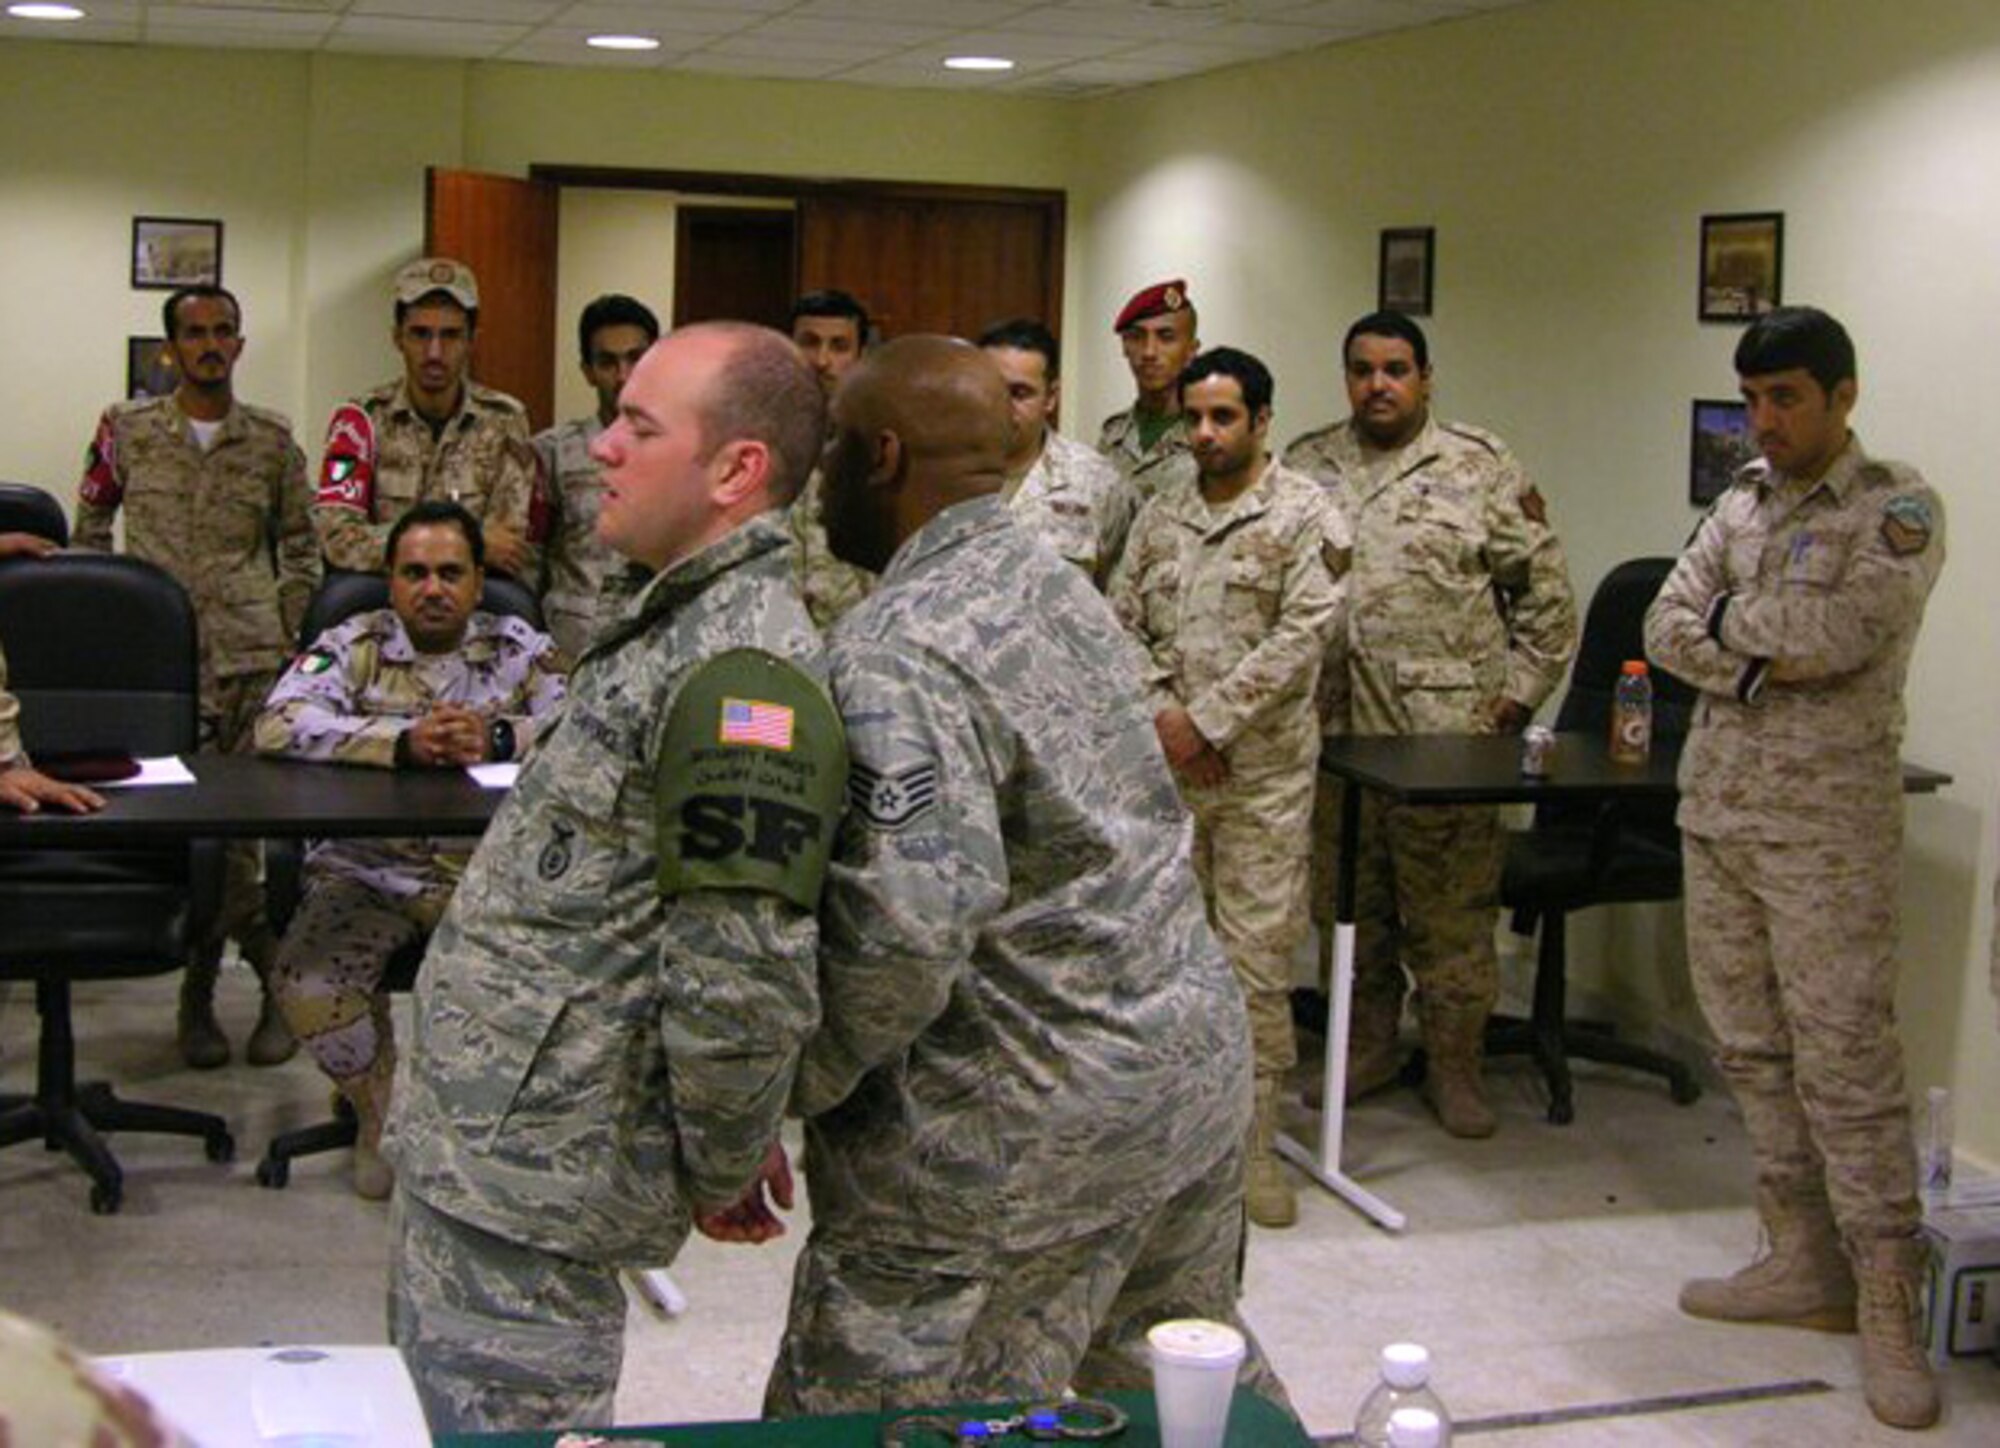 SOUTHWEST ASIA -- Staff Sgt. Ernest Francois, a 387th Expeditionary Security Forces Squadron member deployed from Holloman Air Force Base, N.M., gives a classroom demonstration on handcuffing to members of the Kuwaiti military during host nation training here recently. The training was designed to strengthen the ground combat capability of the host nation military forces. (Courtesy photo)